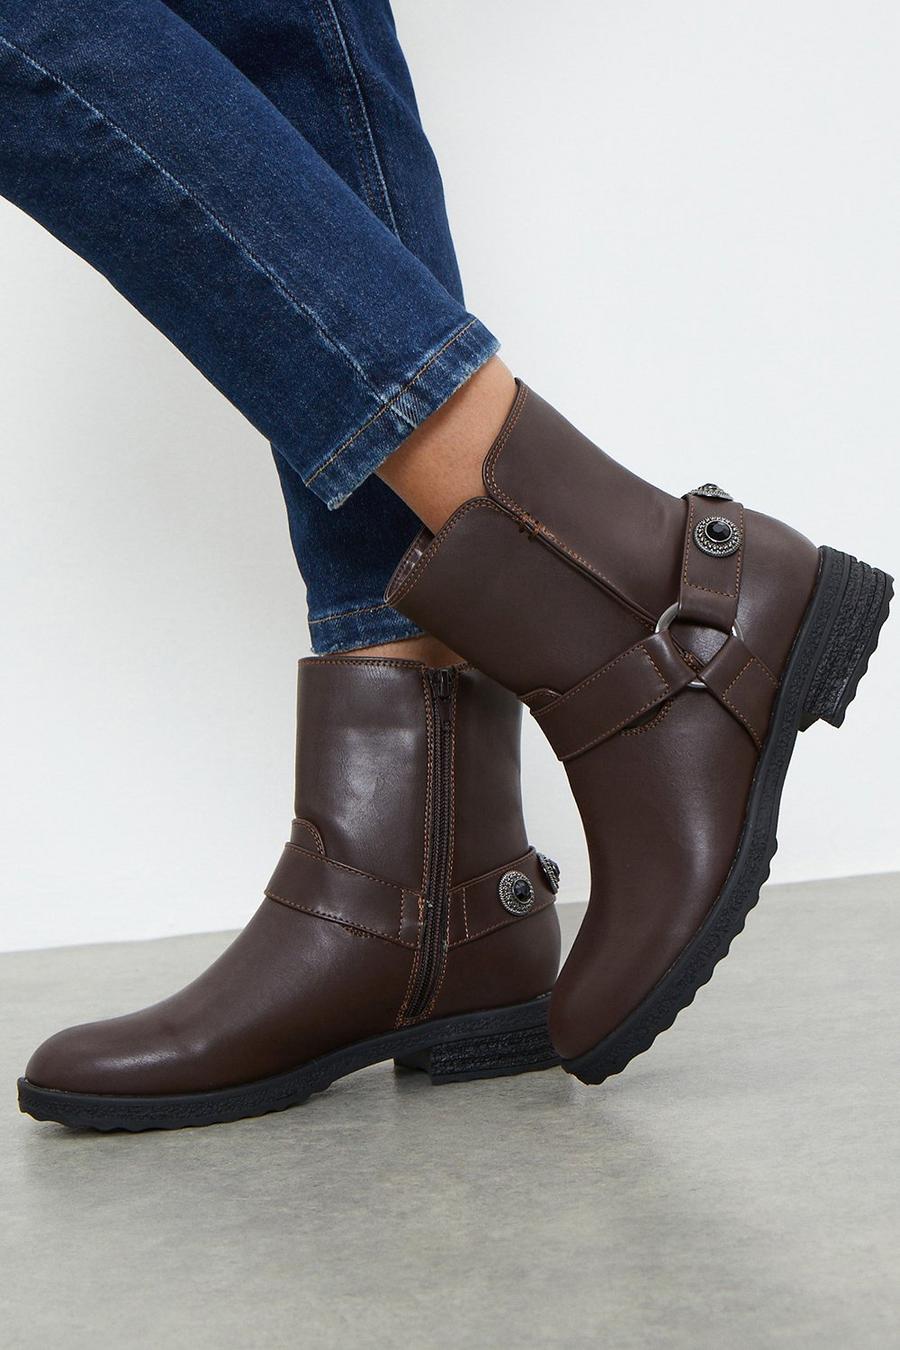 Good For The Sole: Melody Comfort Biker Boots